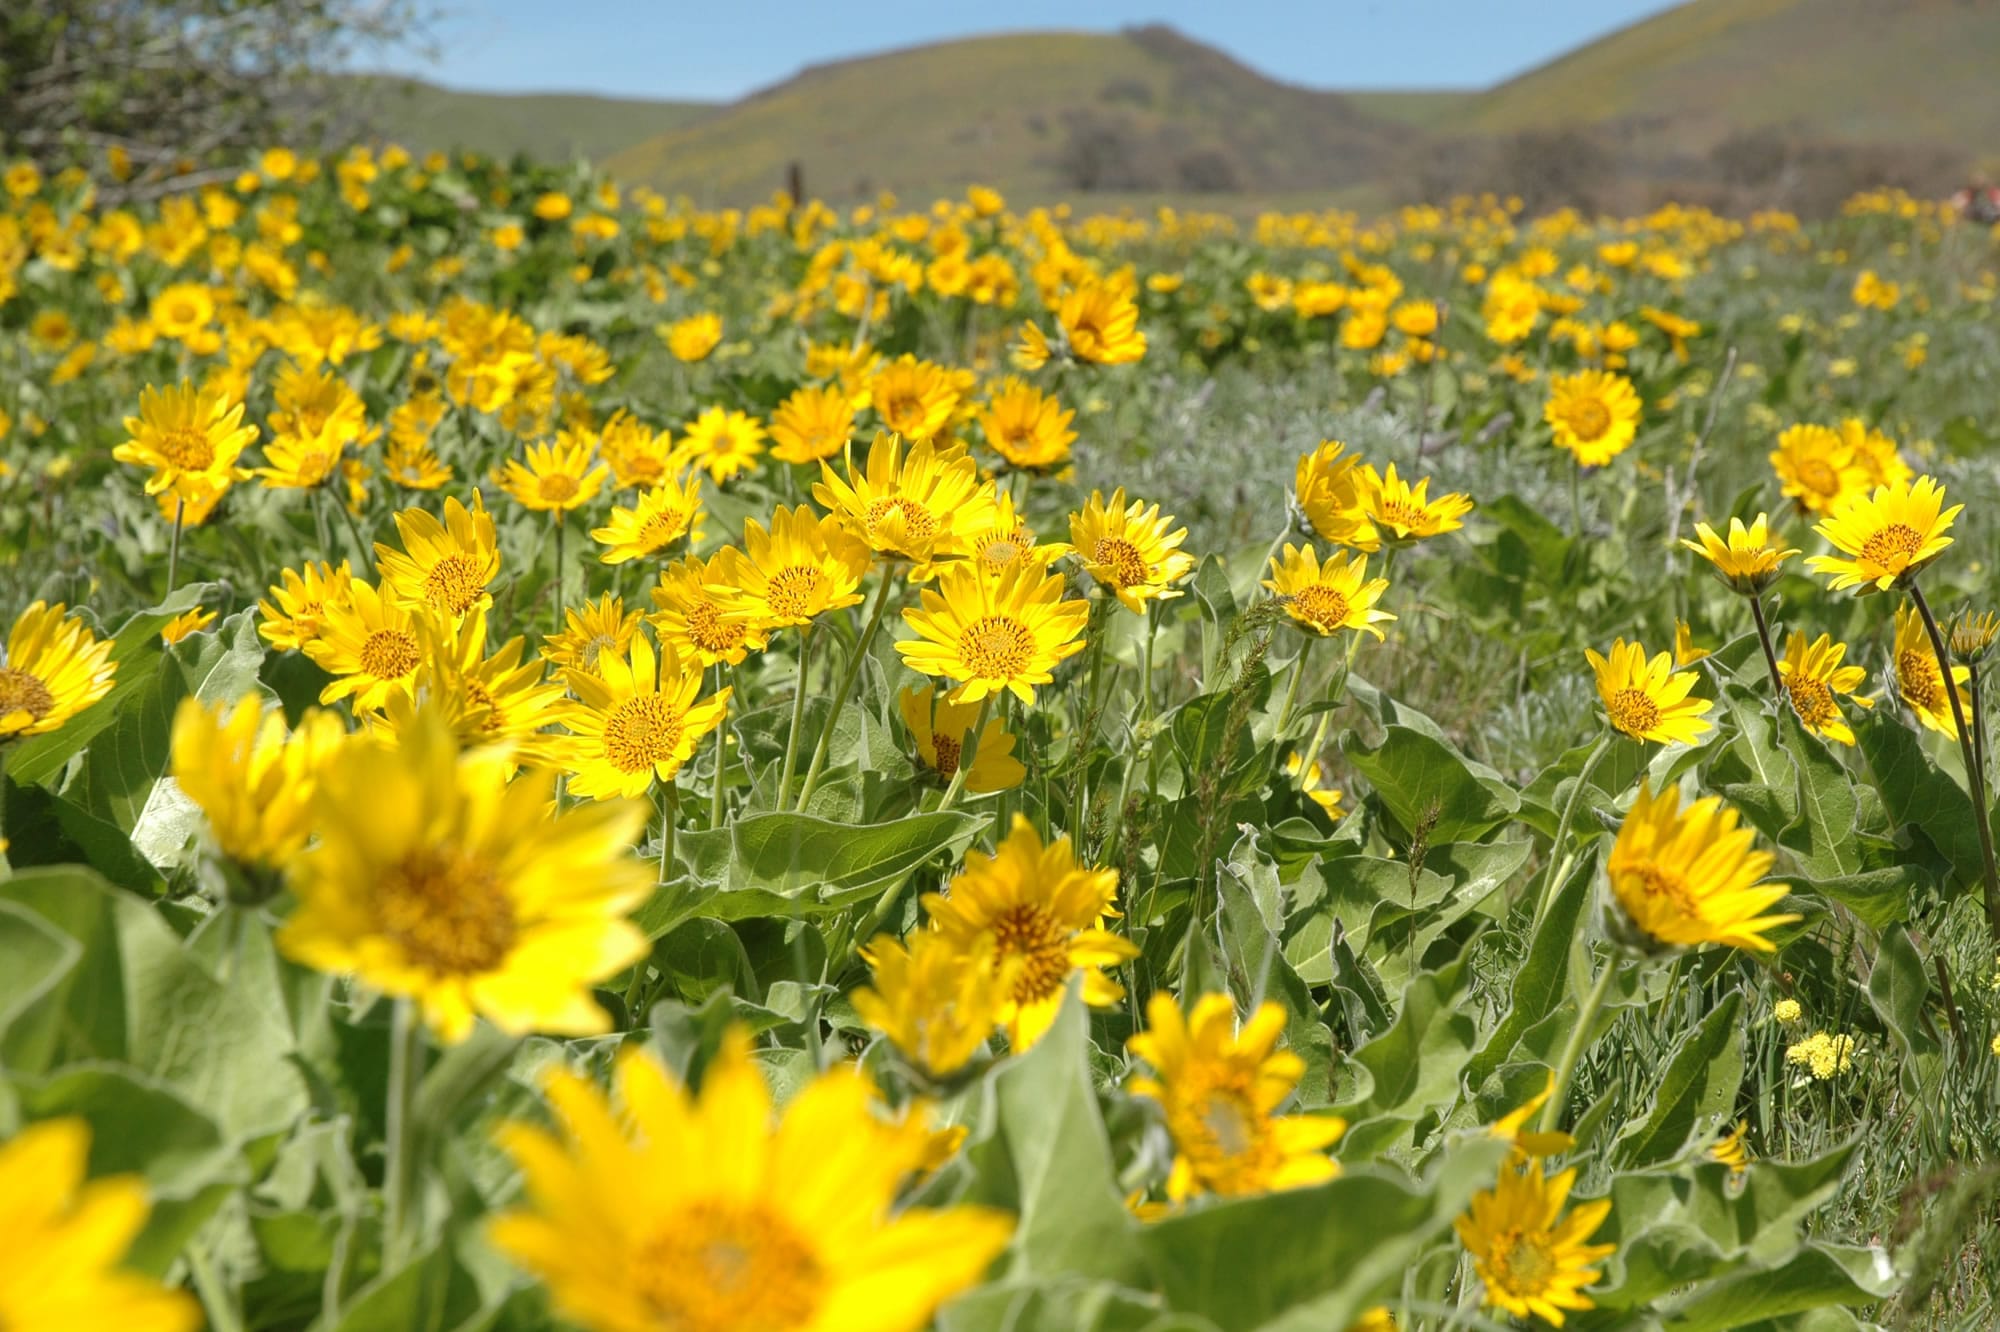 Arrowleaf balsamroot blooms make the eastern end of the Columbia River Gorge spectacular during May.